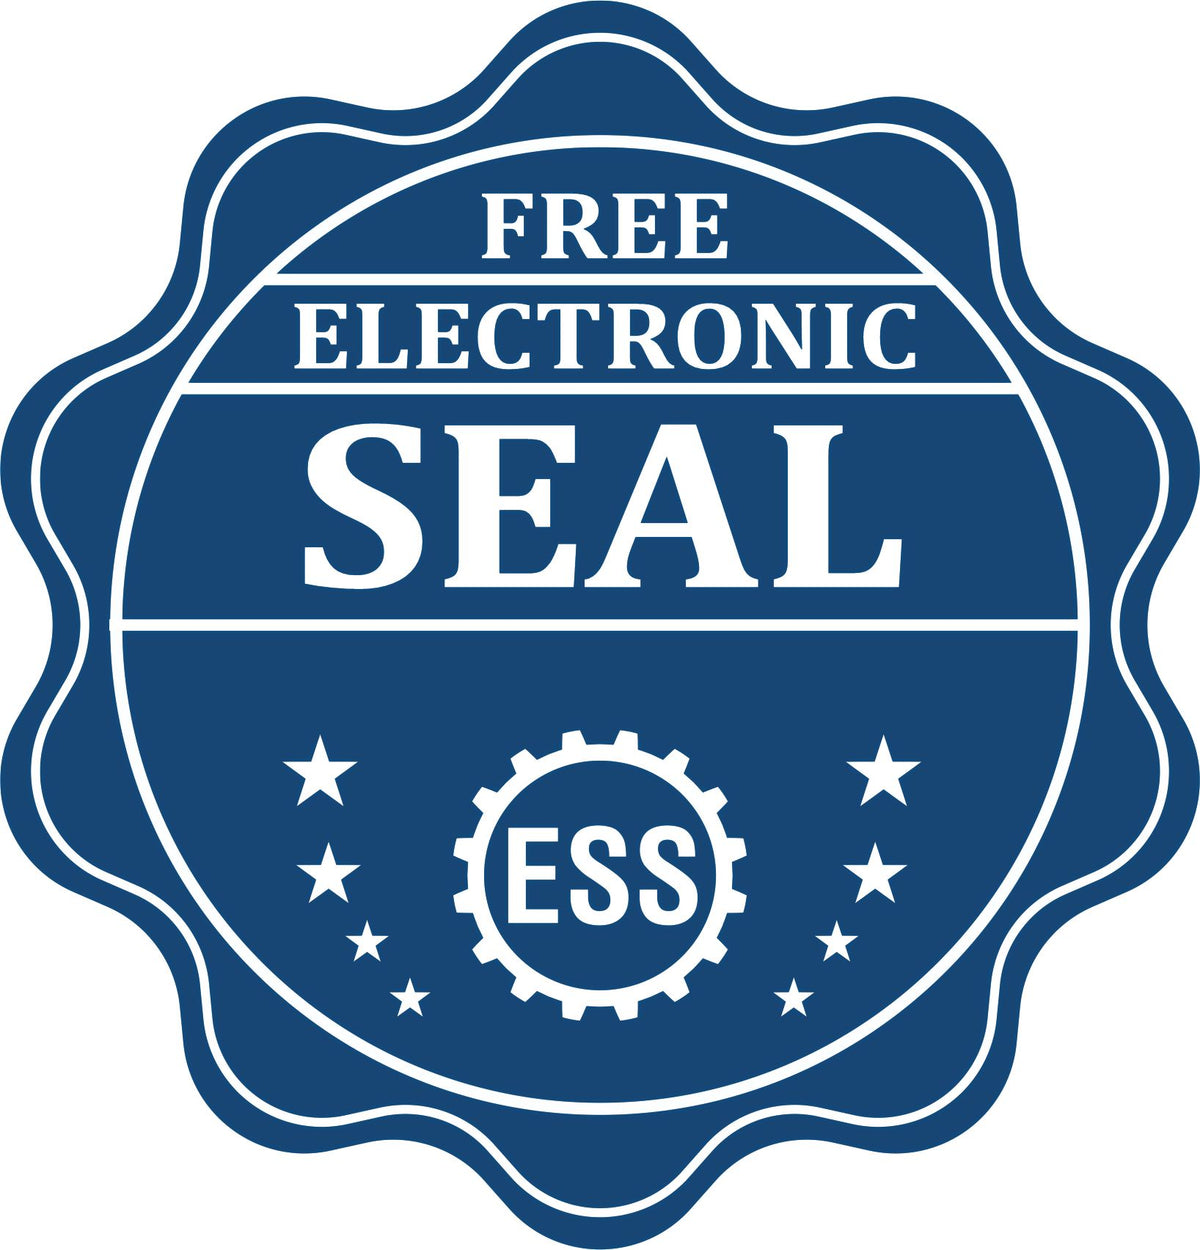 A badge showing a free electronic seal for the Self-Inking South Dakota Landscape Architect Stamp with stars and the ESS gear on the emblem.